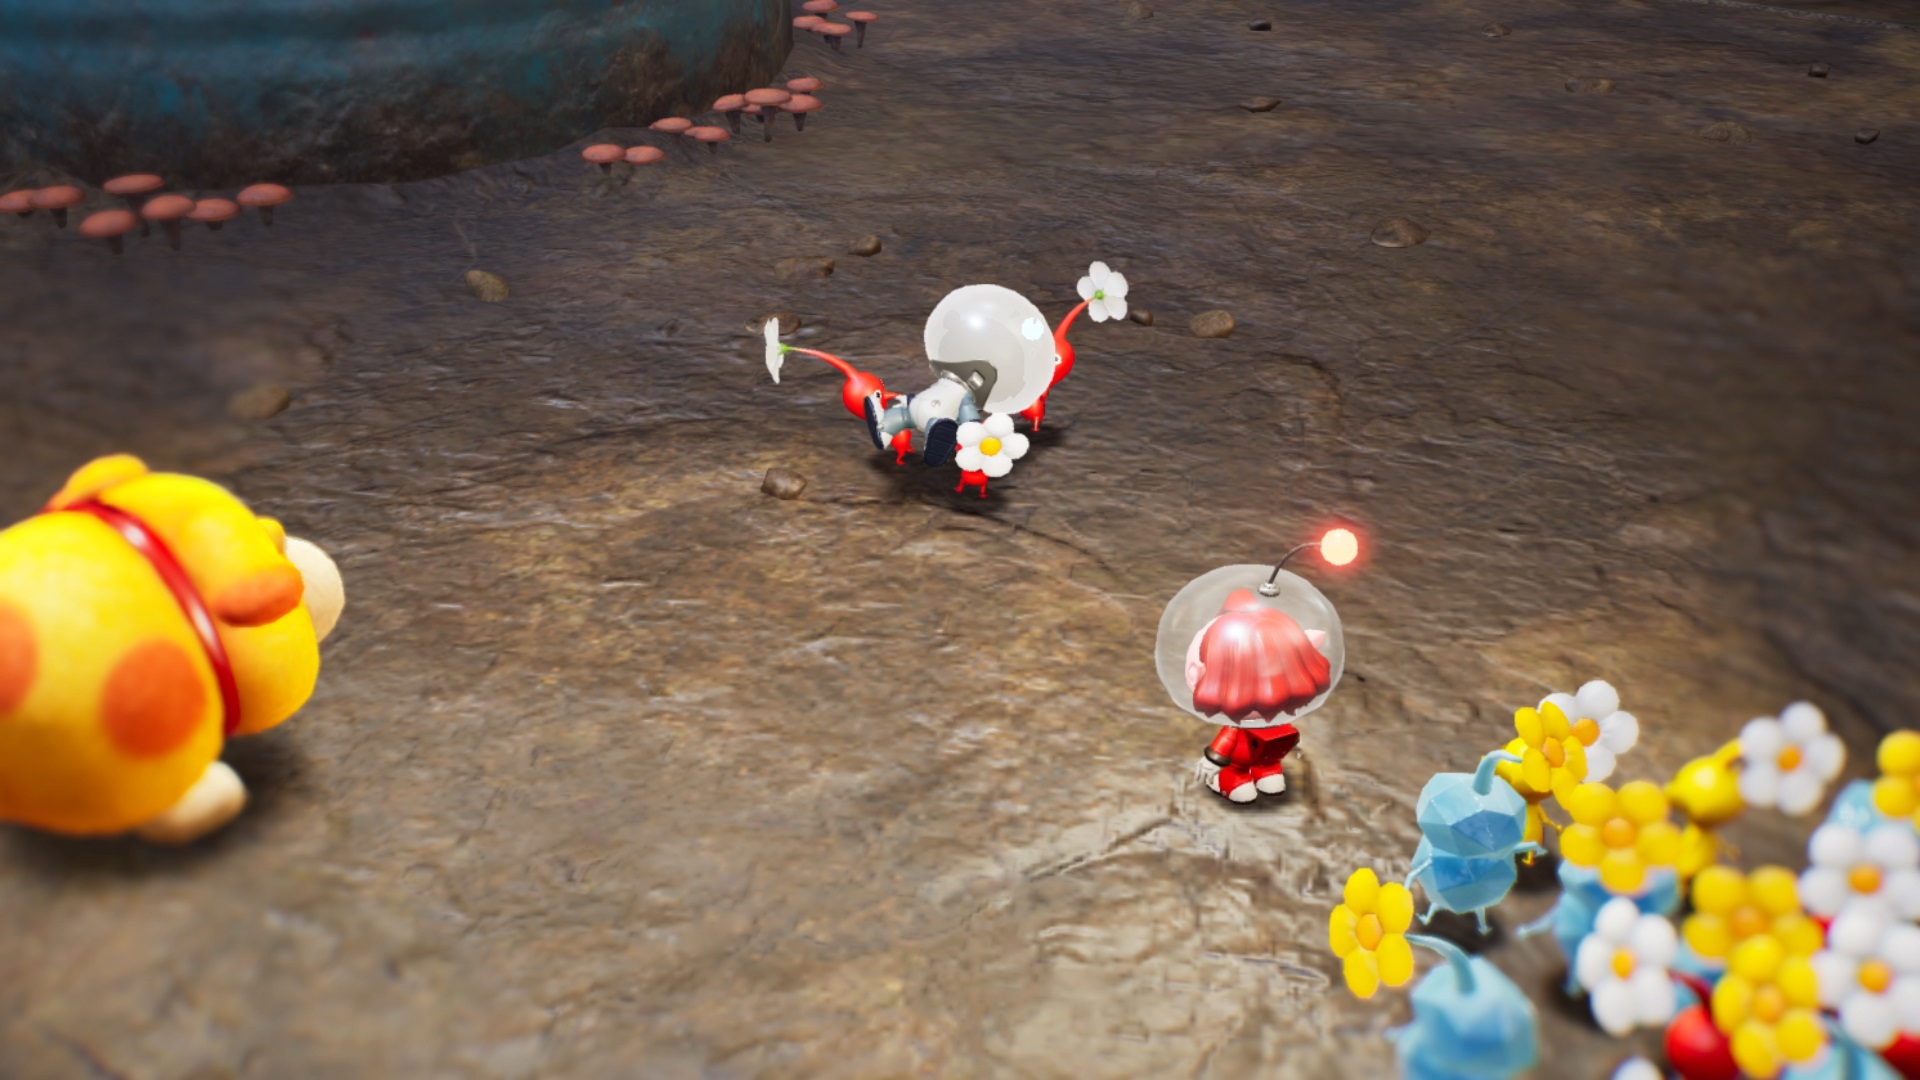 Pikmin 4 Gameplay Overview Trailer Shows Off Exploration and Dandori  Battles; Demo Available June 28